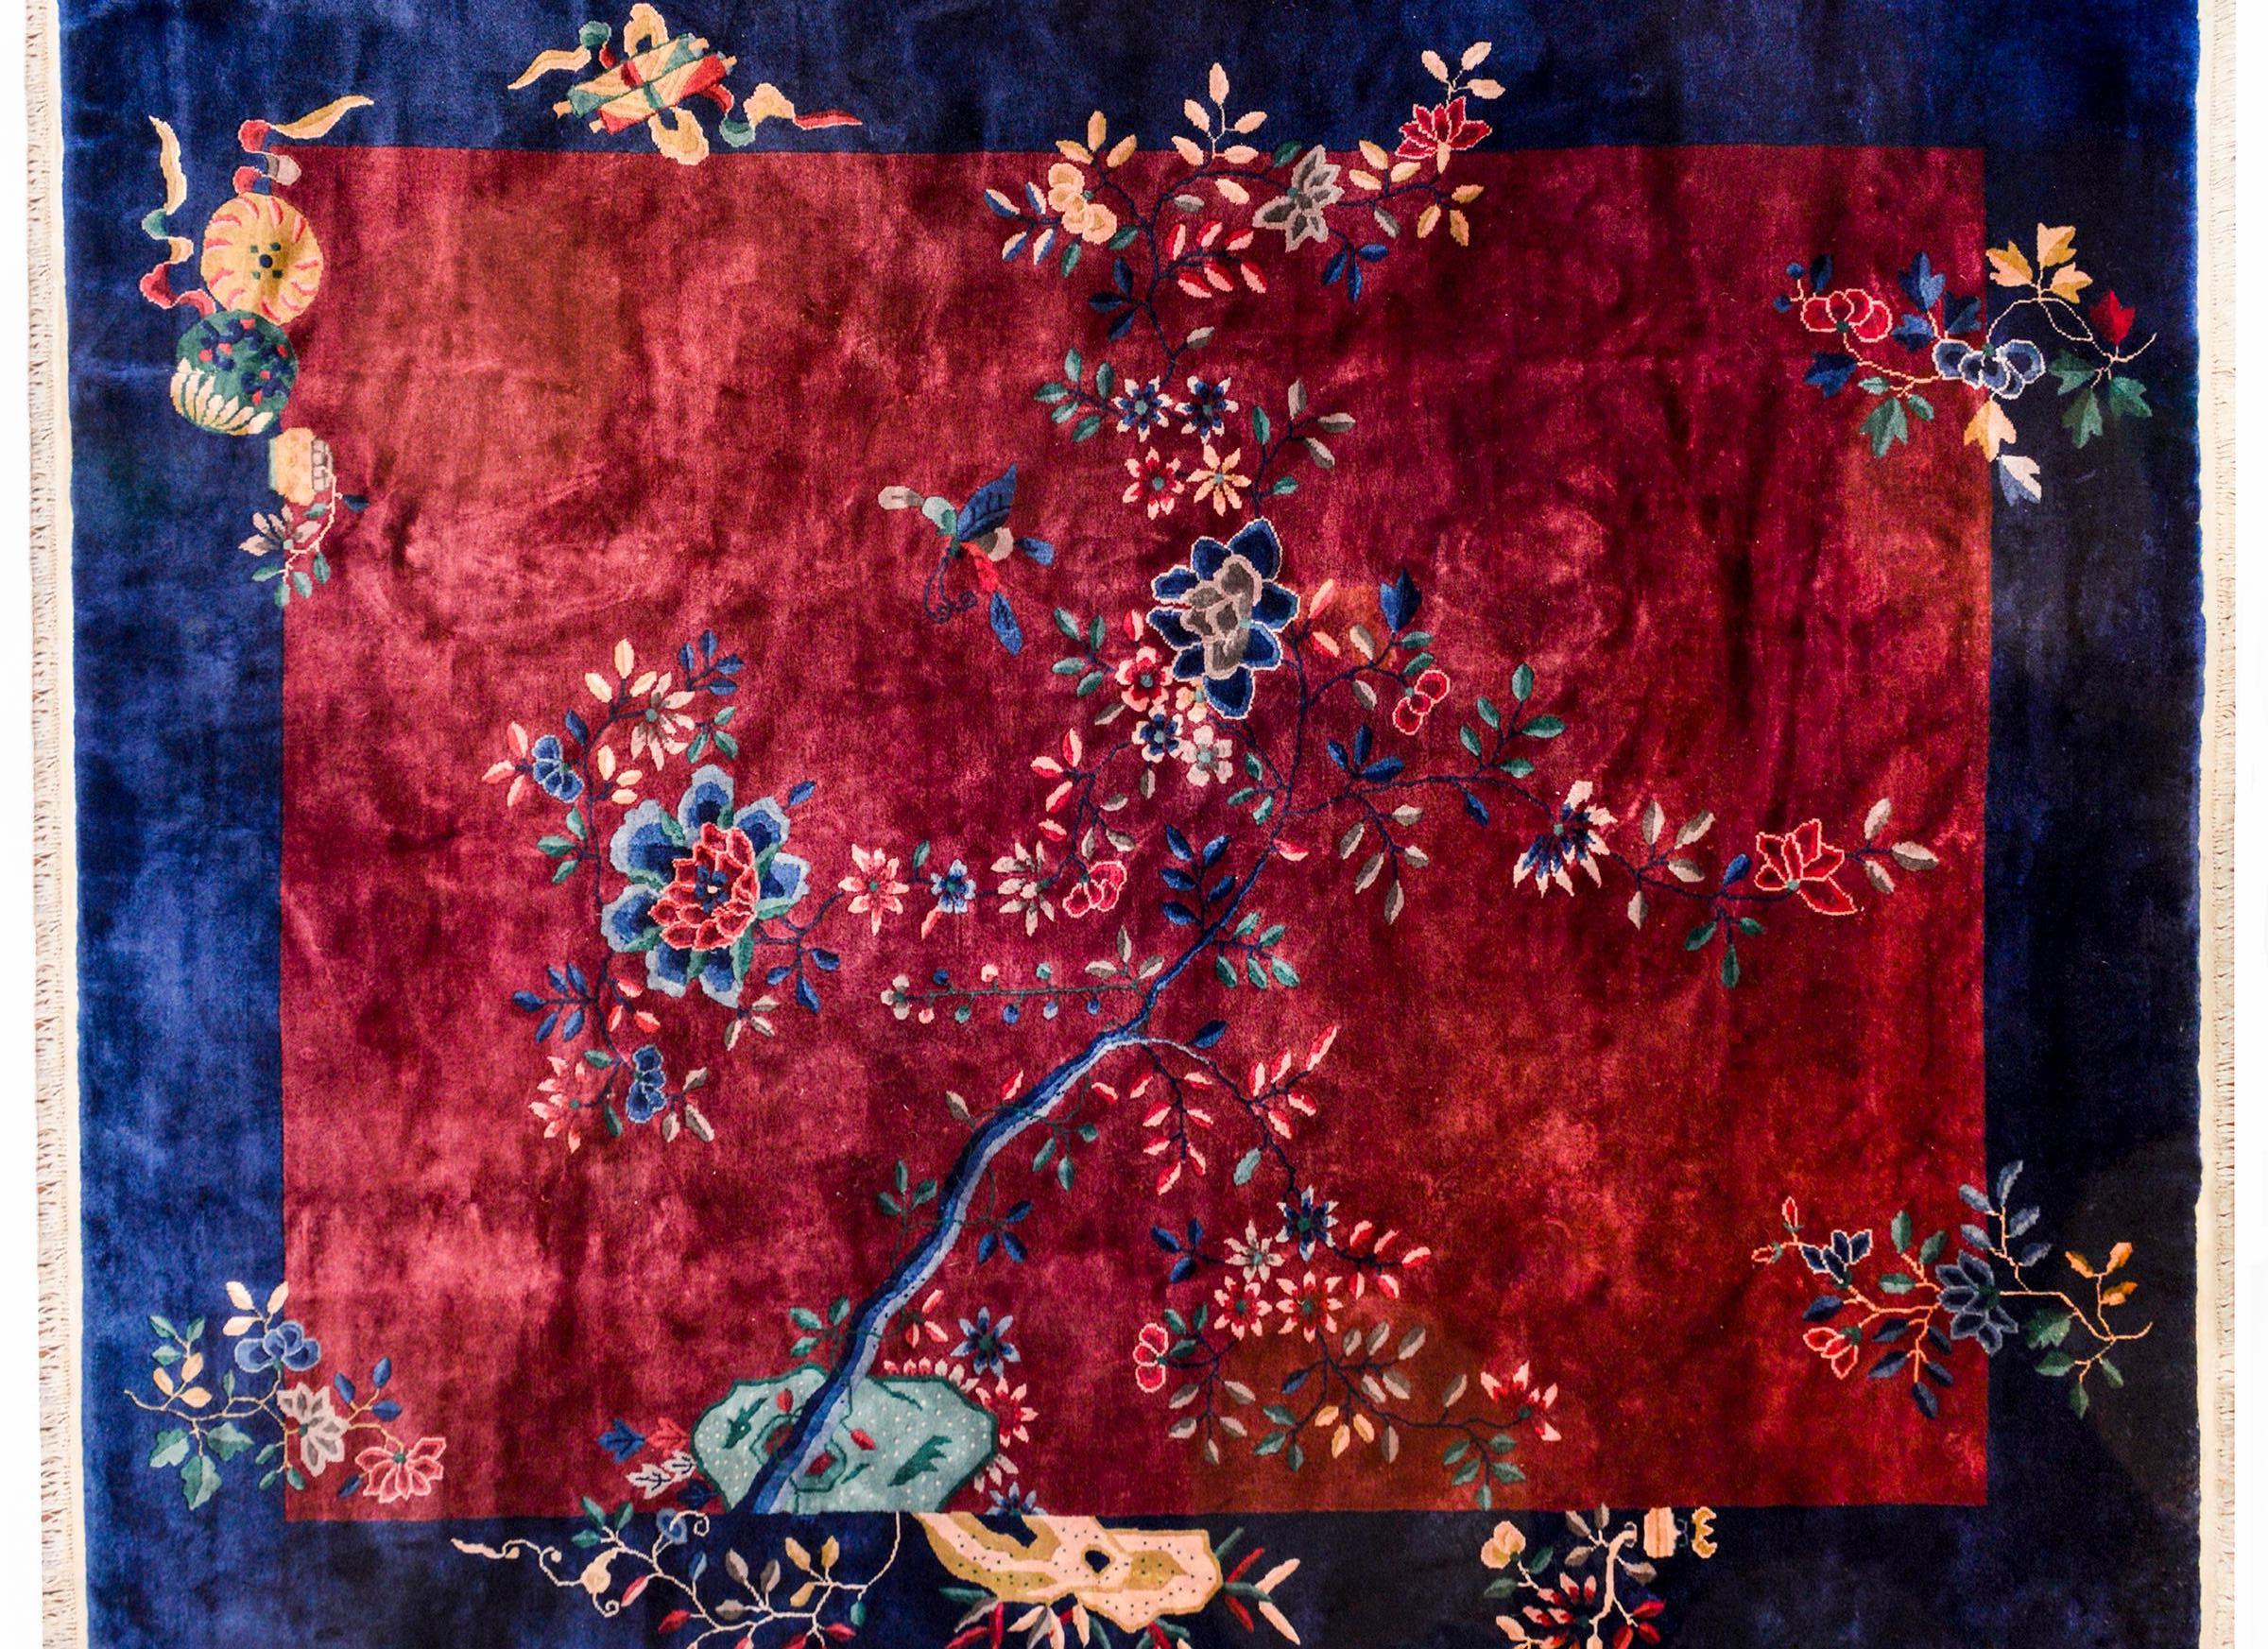 A gorgeous Chinese Art Deco rug with a deep shimmering cranberry field with a wide dark indigo border. A scholar's rock appears at the bottom, with a single branch with multiple species of flowers including peonies, chrysanthemums, and prunus.